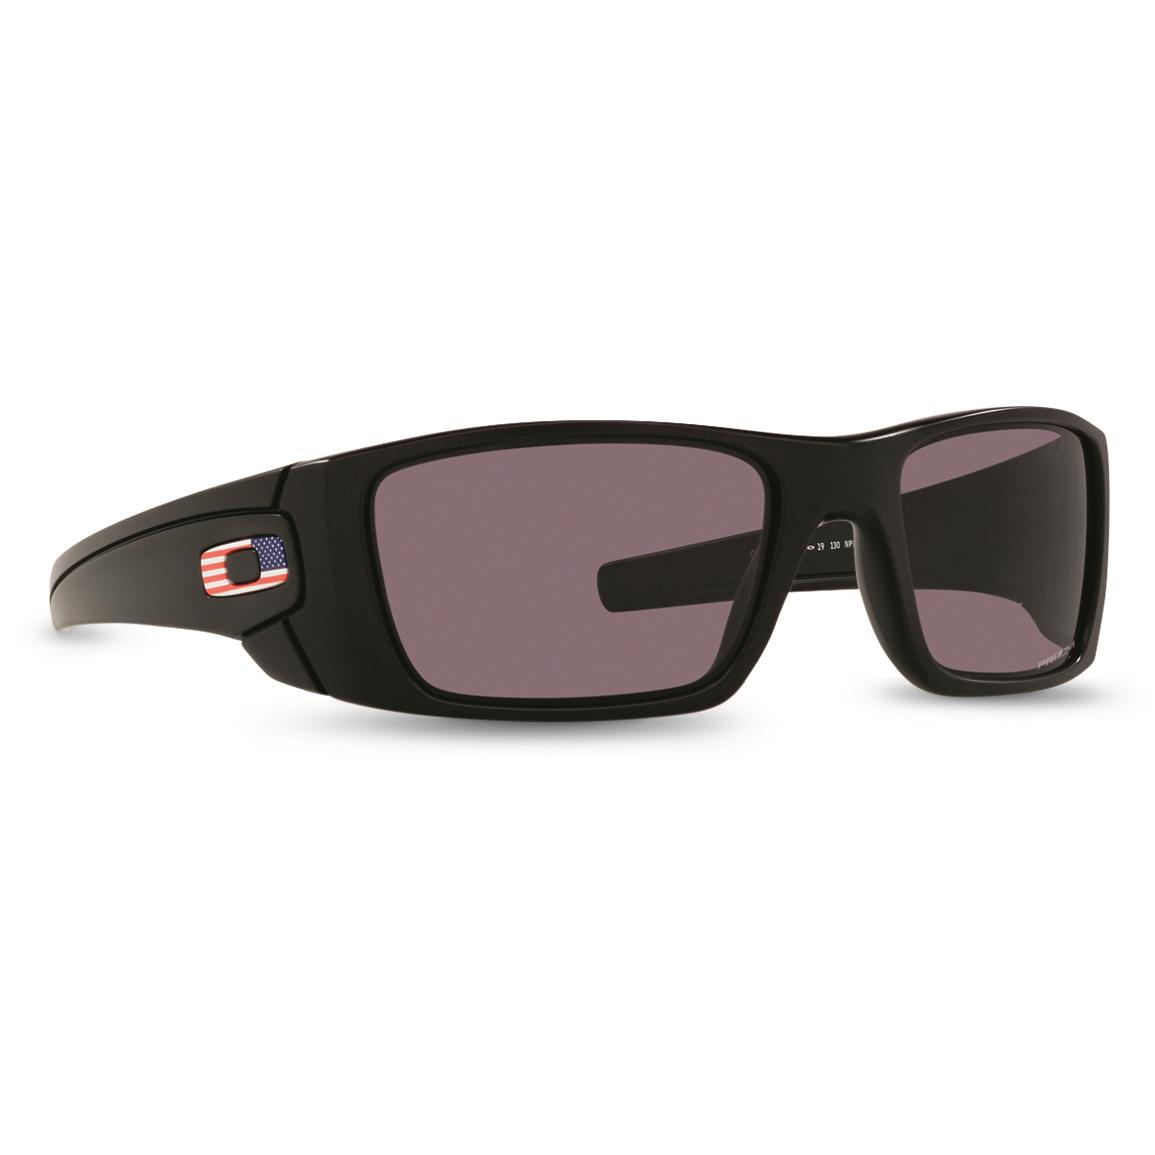 Oakley Standard Issue Fuel Cell US Flag Collection Sunglasses with Prizm Lenses, Matte Black/prizm Gry